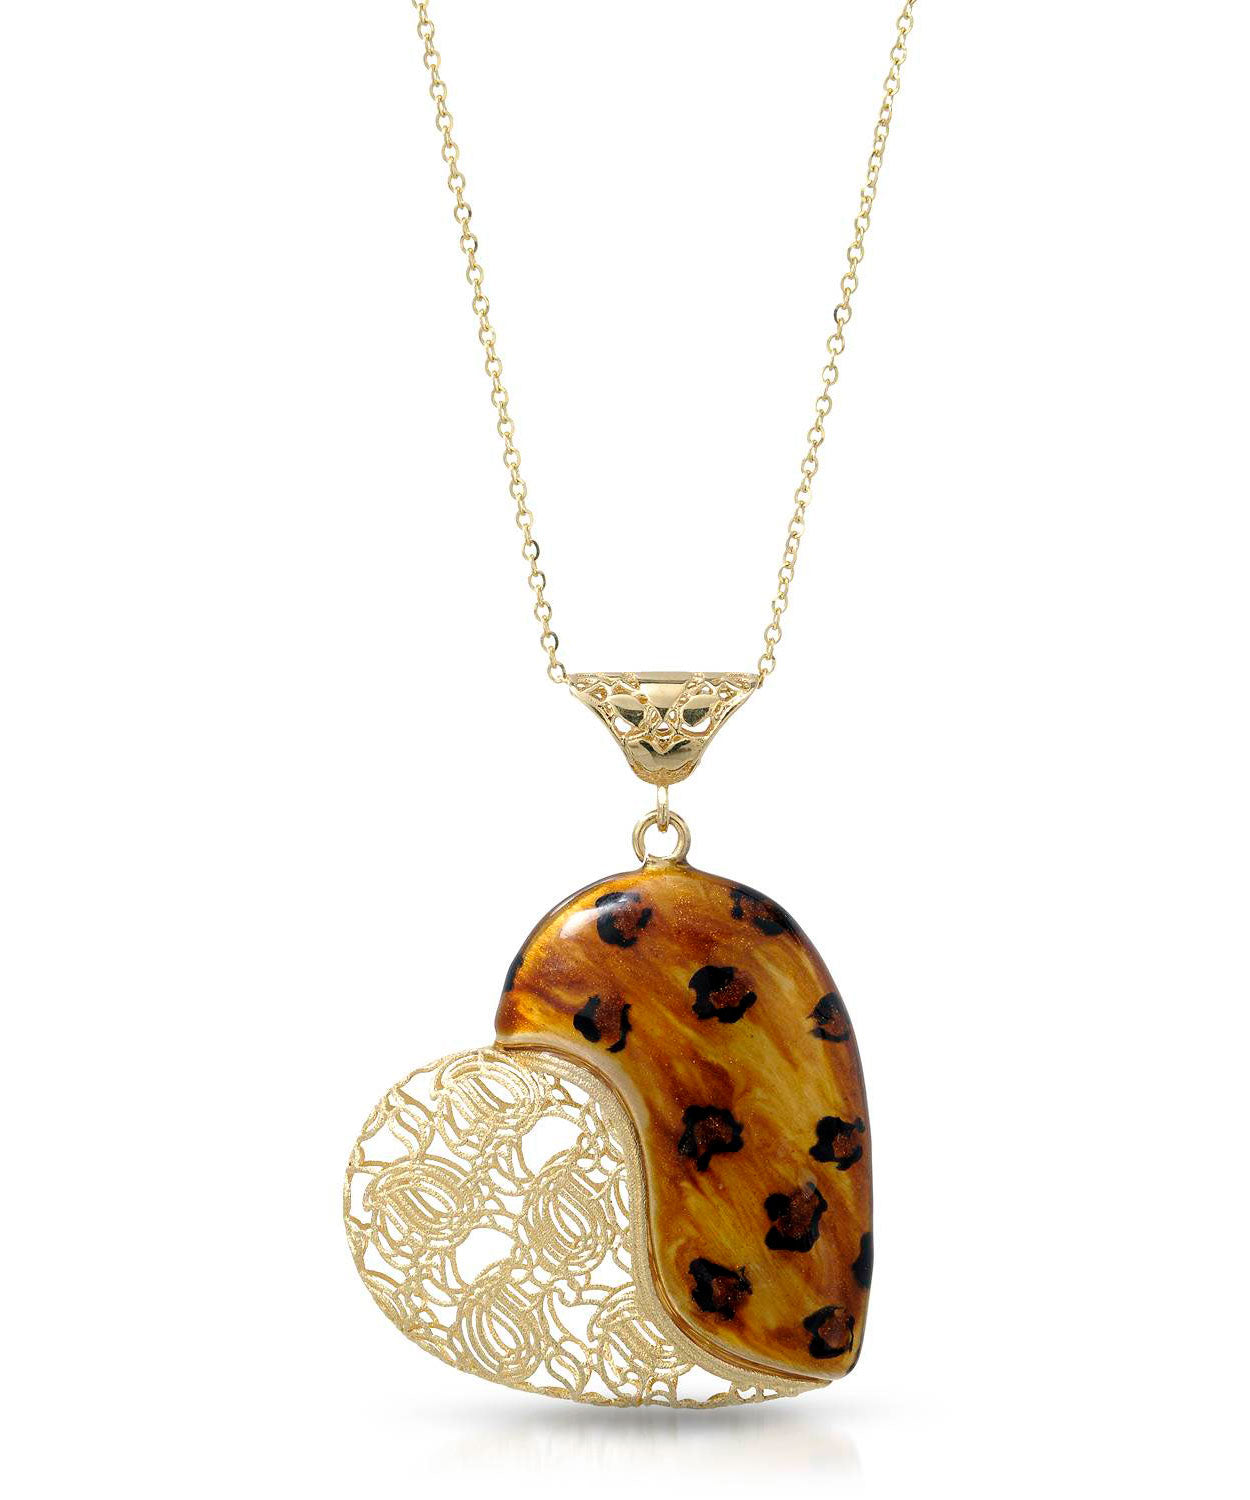 Patterns of Love Collection 14k Gold & Enamel Heart Pendant With Chain - Made in Italy View 1